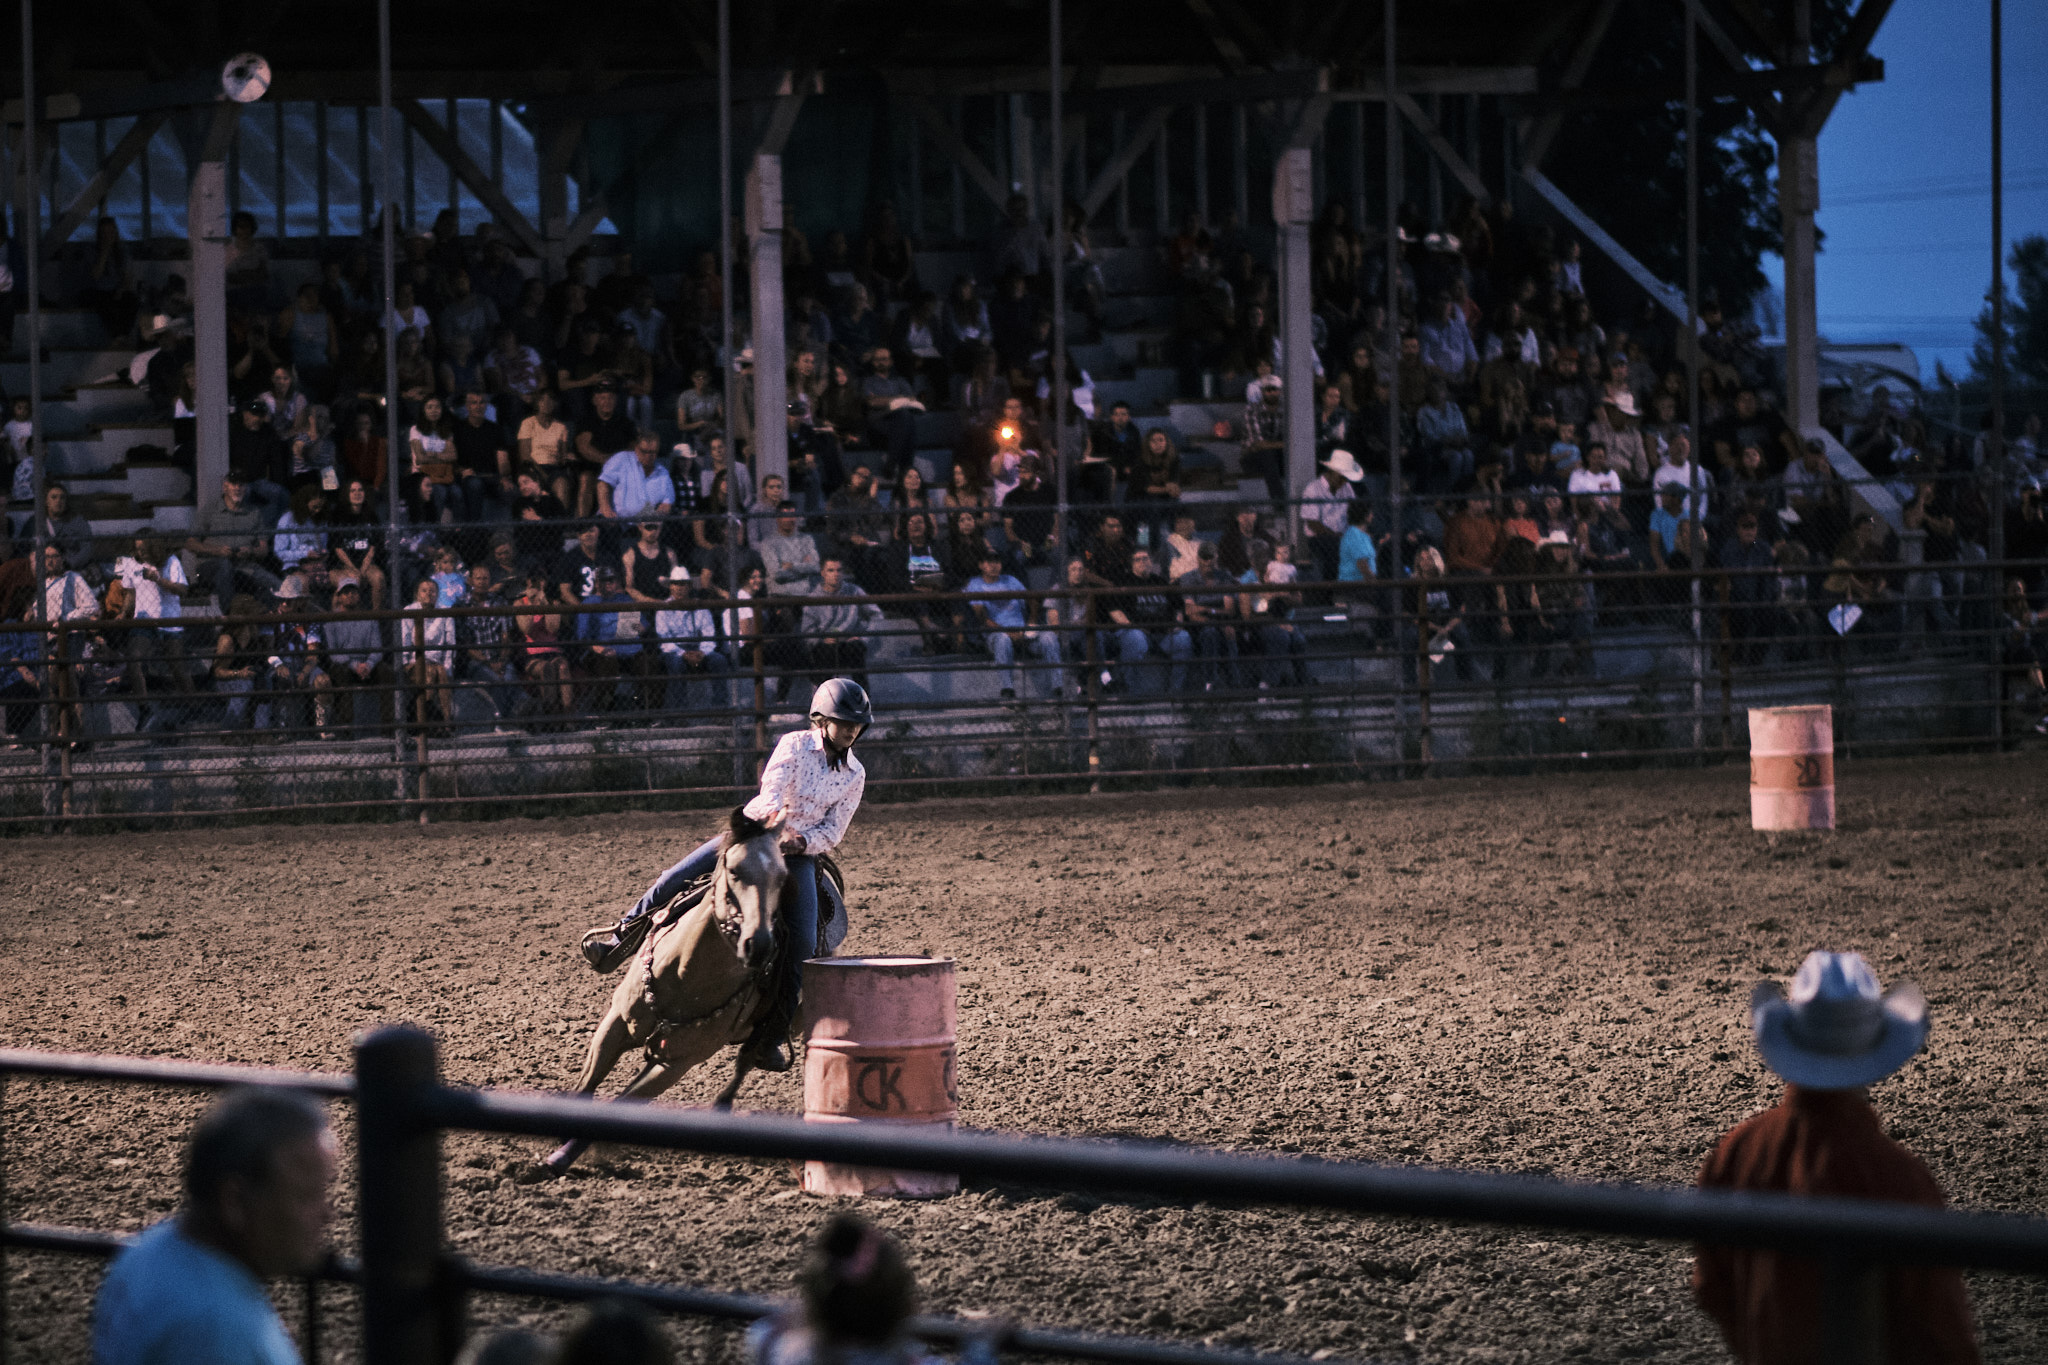 A young cowgirl barrel racing her horse around a barrel